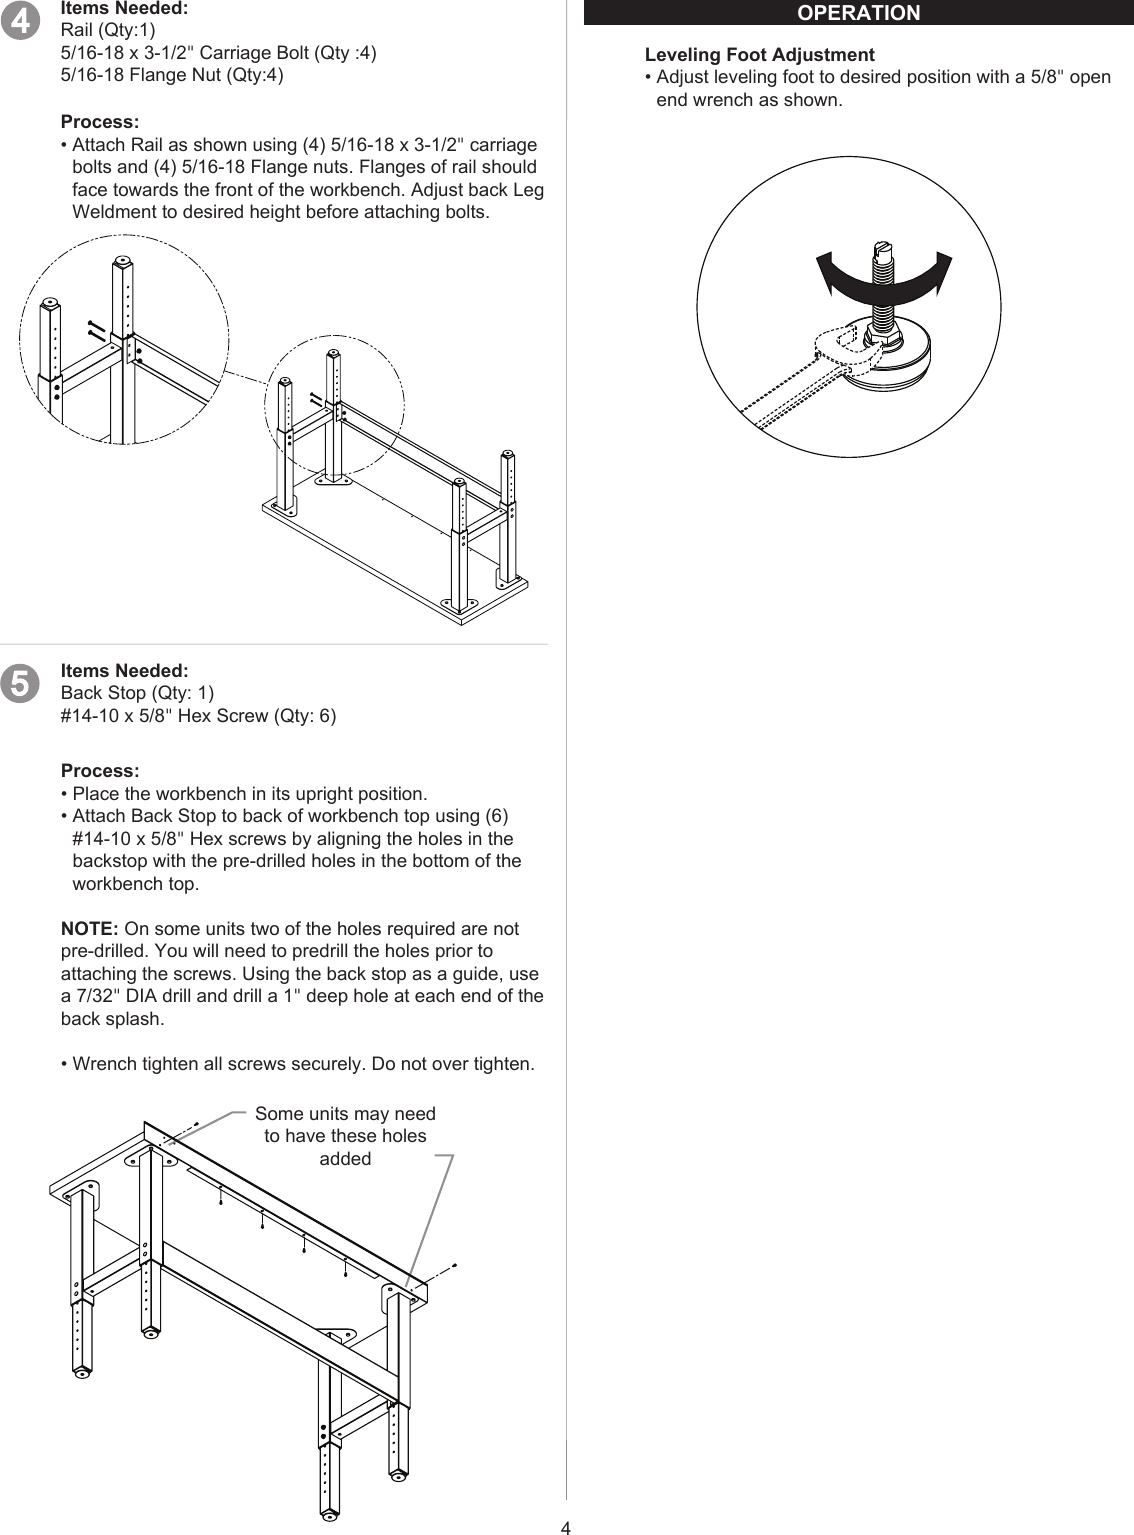 Page 4 of 10 - Craftsman Craftsman-Premium-Heavy-Duty-6-Ft-Workbench-With-Butcher-Block-Top-Instruction-Manual-  Craftsman-premium-heavy-duty-6-ft-workbench-with-butcher-block-top-instruction-manual